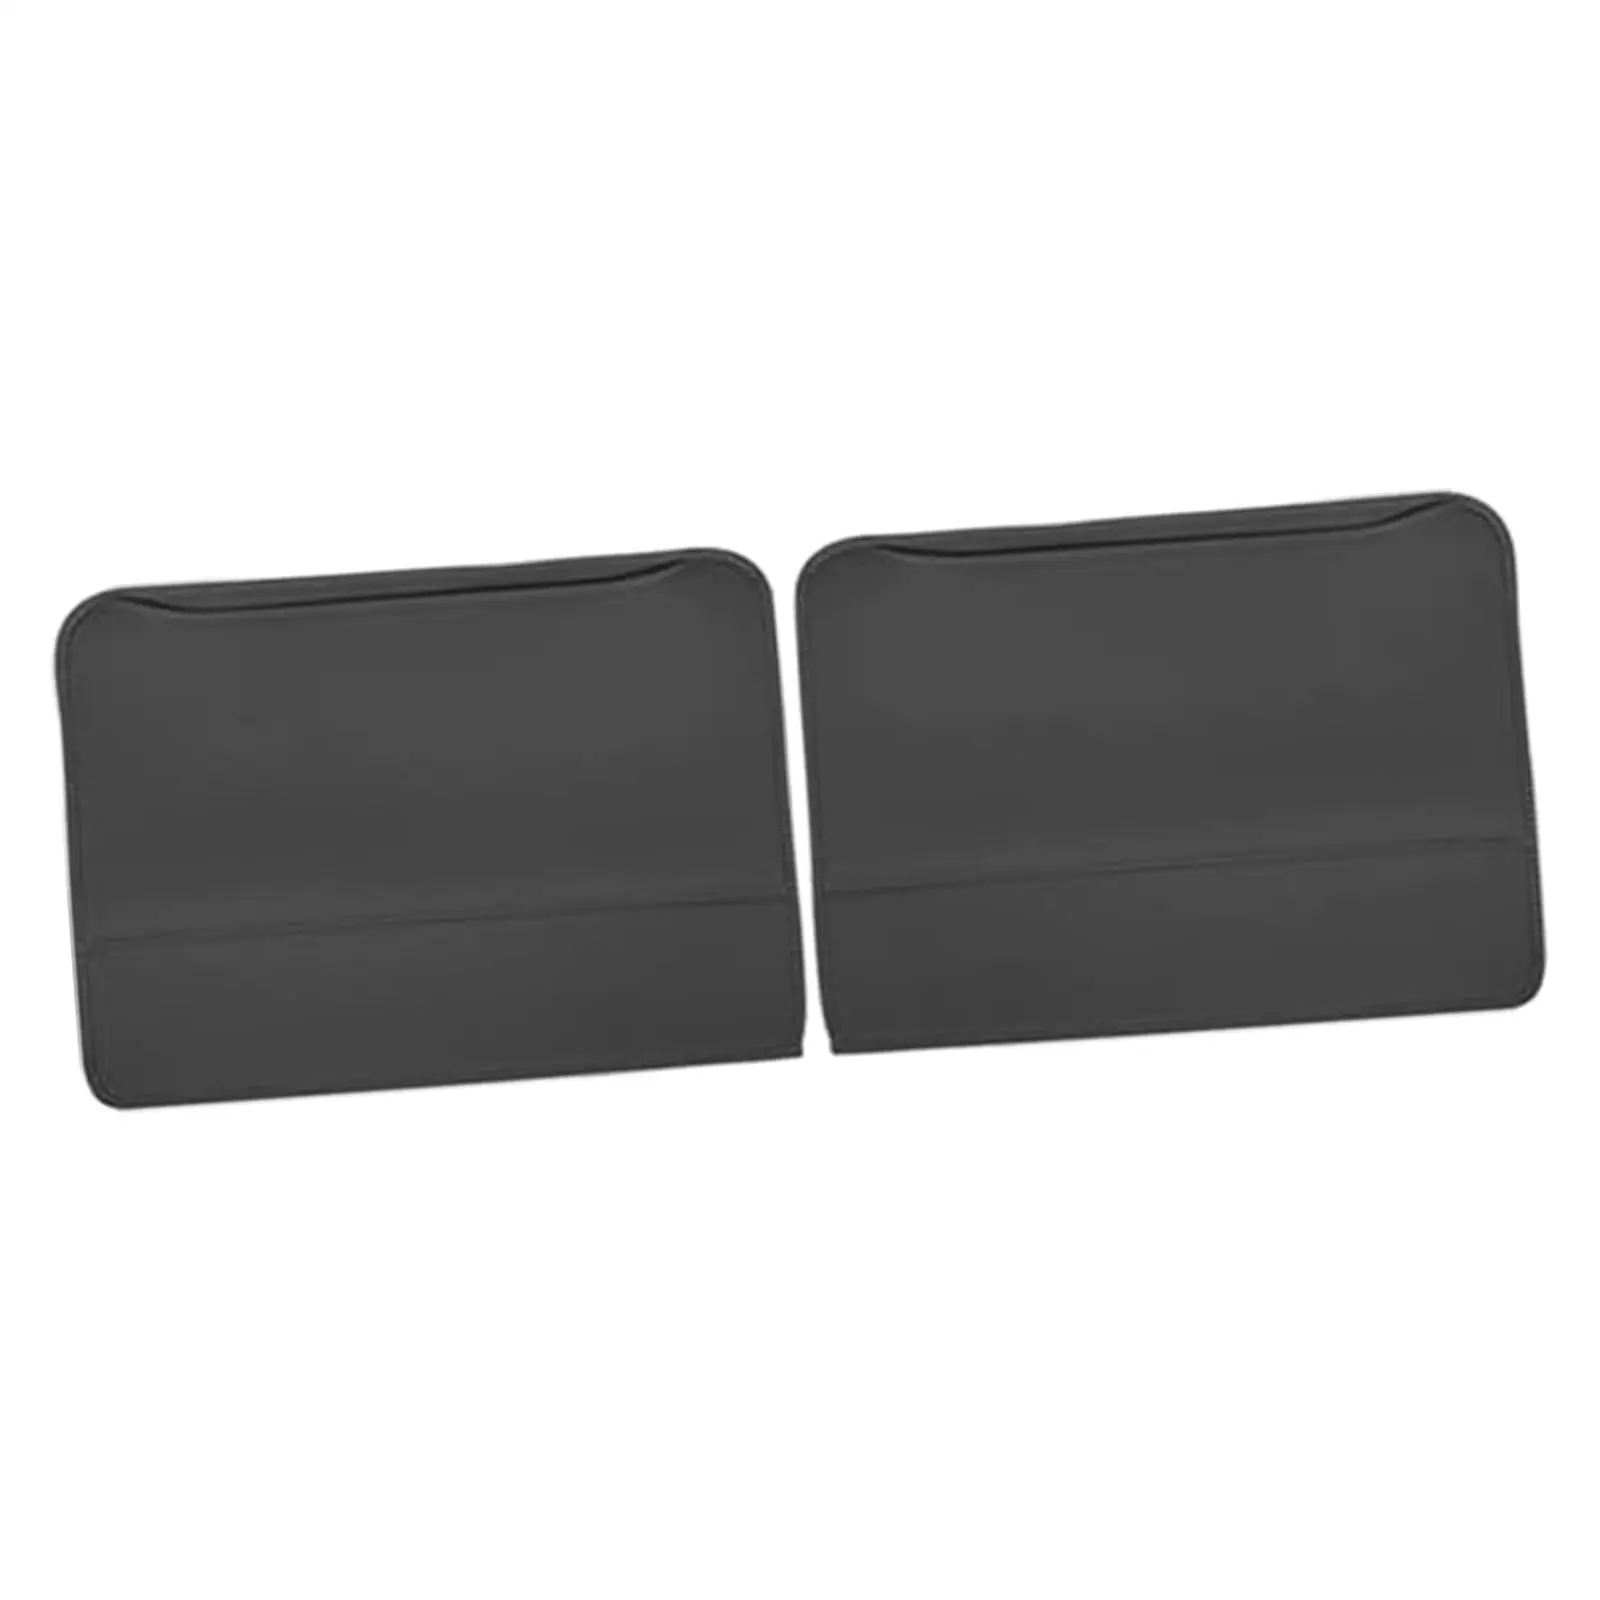 2 Pieces Seat Back Kick Mats with Storage Pocket PU Leather Protection Wear Resistant Automotive Accessories for Byd Seal